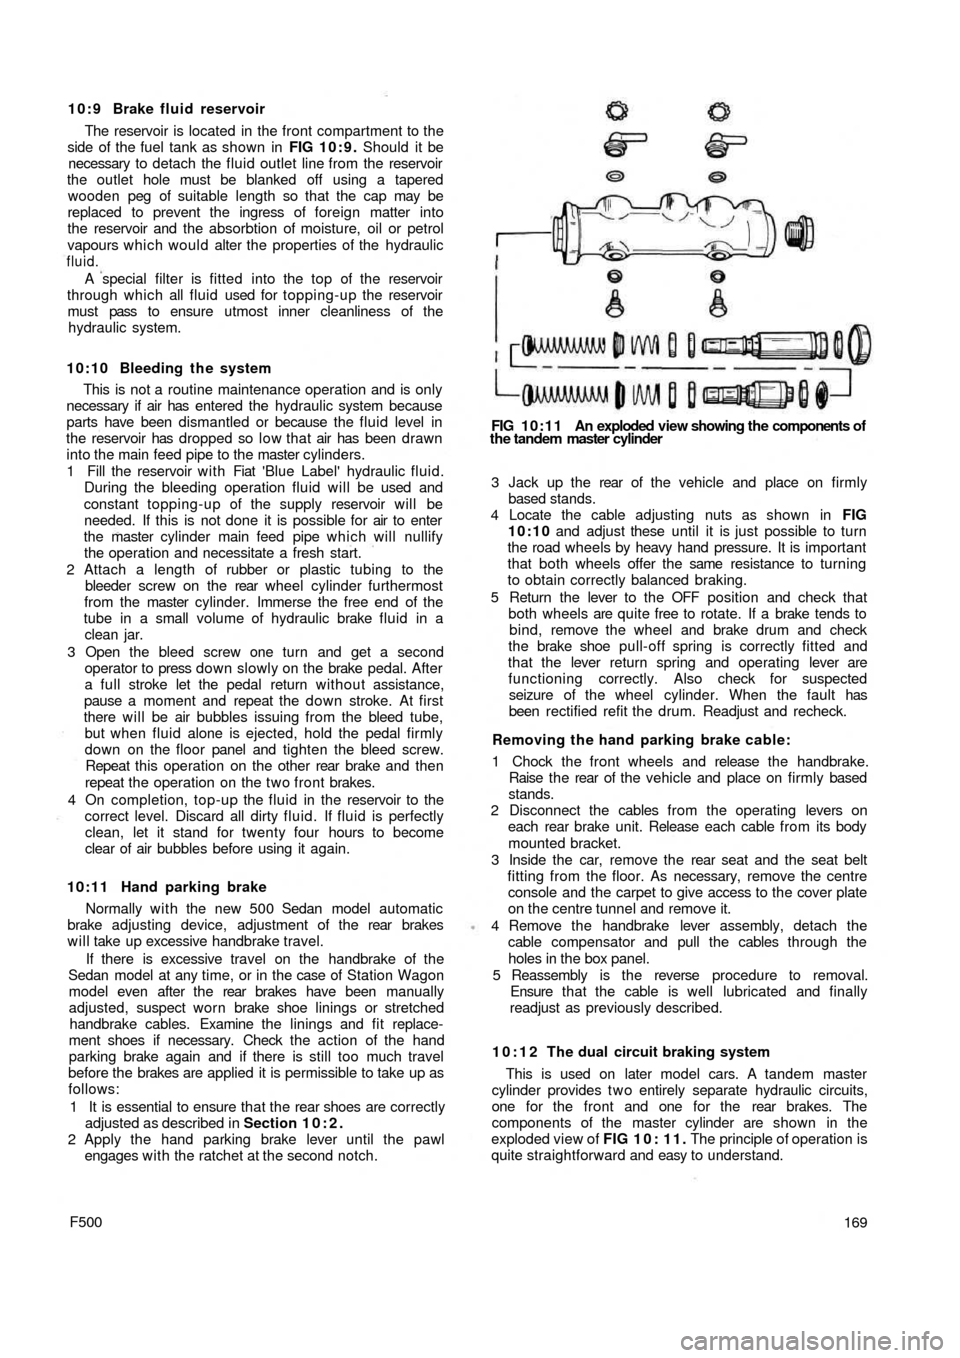 FIAT 500 1968 1.G Workshop Manual 10:9 Brake fluid reservoir
The reservoir is located in the front compartment to the
side of the fuel tank as shown  in FIG 10:9. Should it be
necessary to detach the fluid outlet line from  the reserv